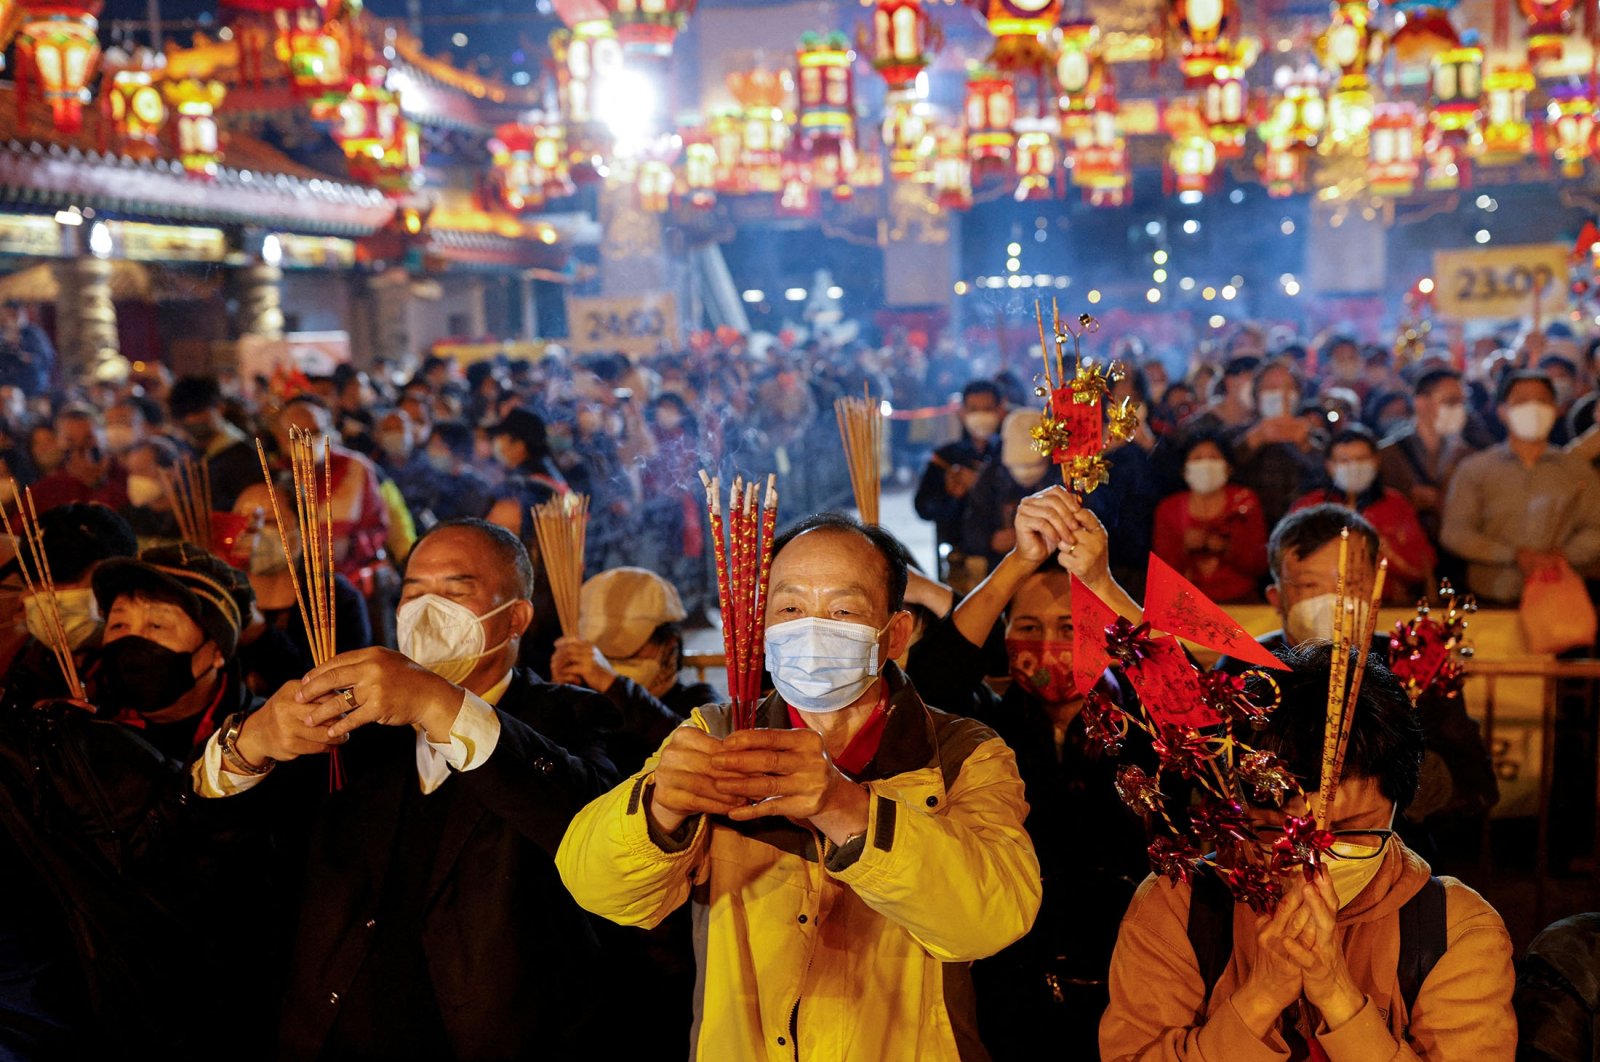 Worshippers wearing face masks make their first offerings inside the Wong Tai Sin Temple, a moment before the Lunar New Year, in Hong Kong, China, Jan. 21, 2023. (Reuters Photo)